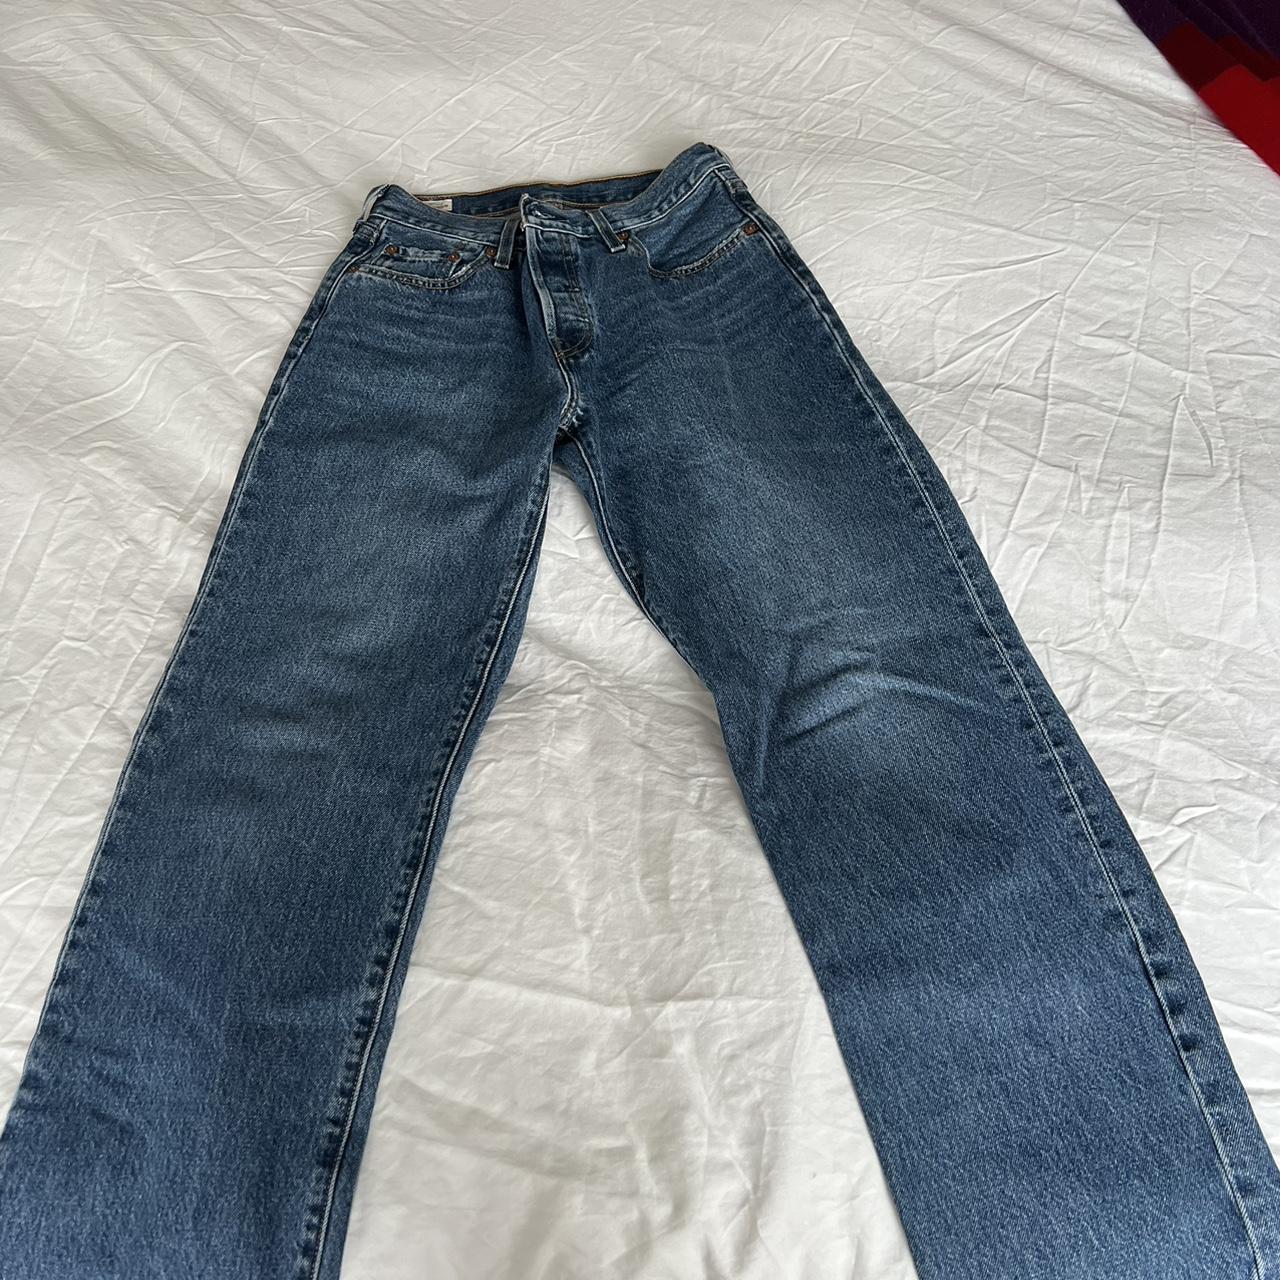 Levi’s 501 Jeans Perfect condition, no flaws Loose... - Depop